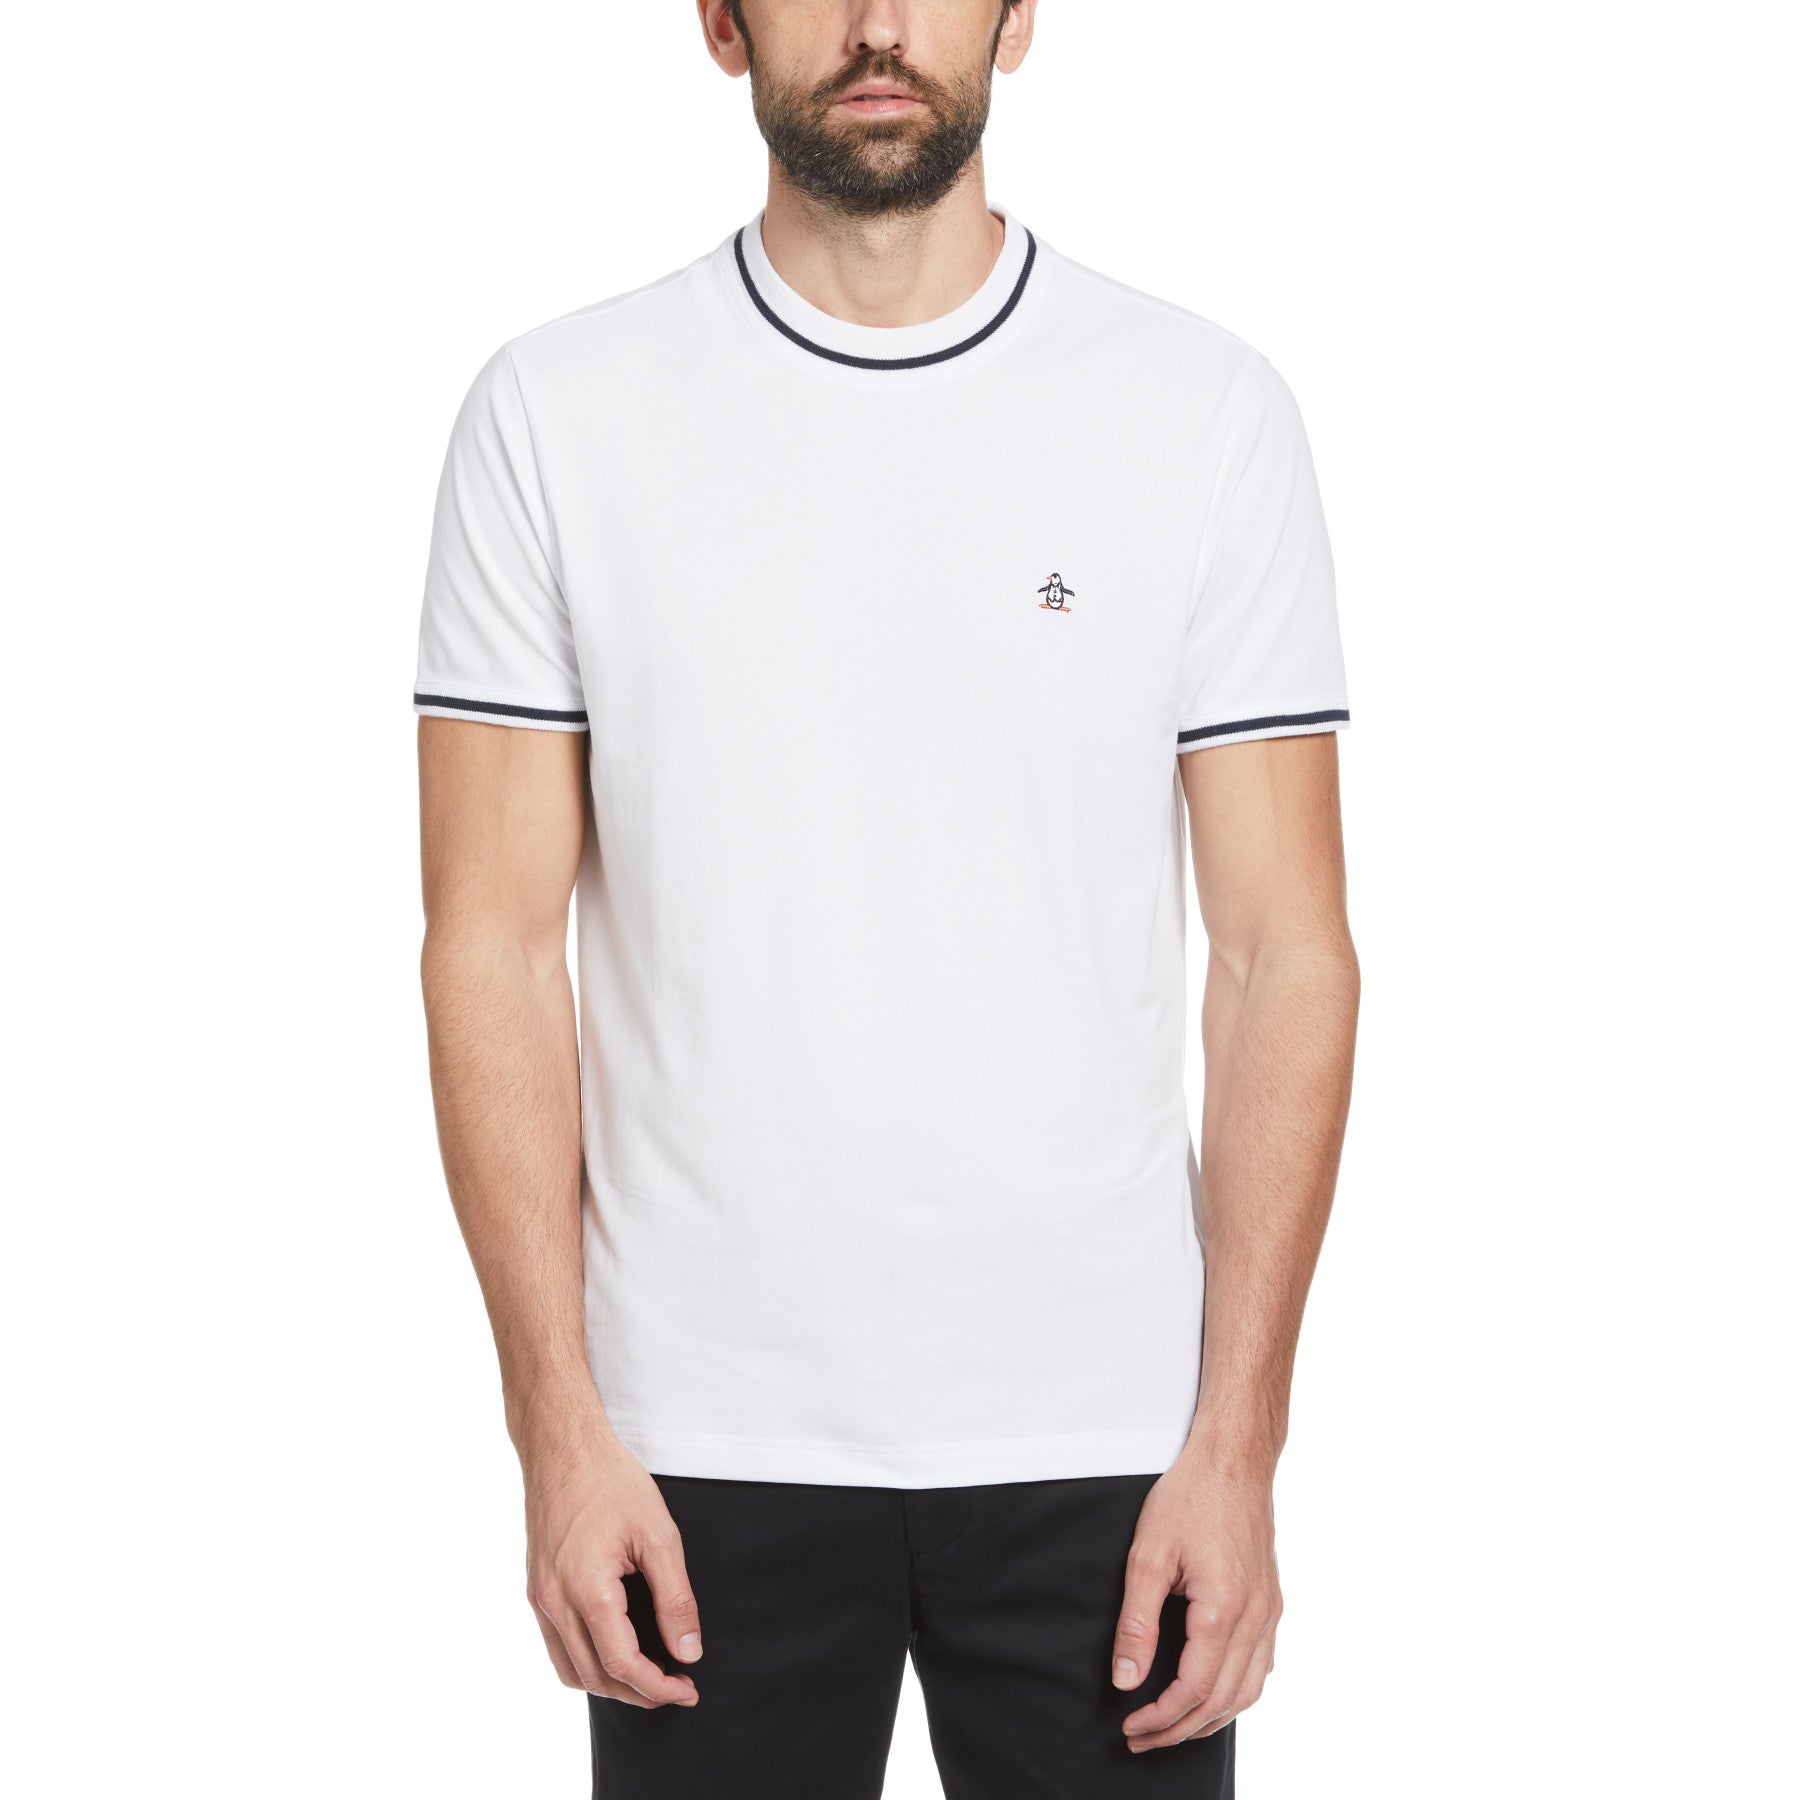 View Icons Organic Cotton Short Sleeve Pique TShirt In Bright White information